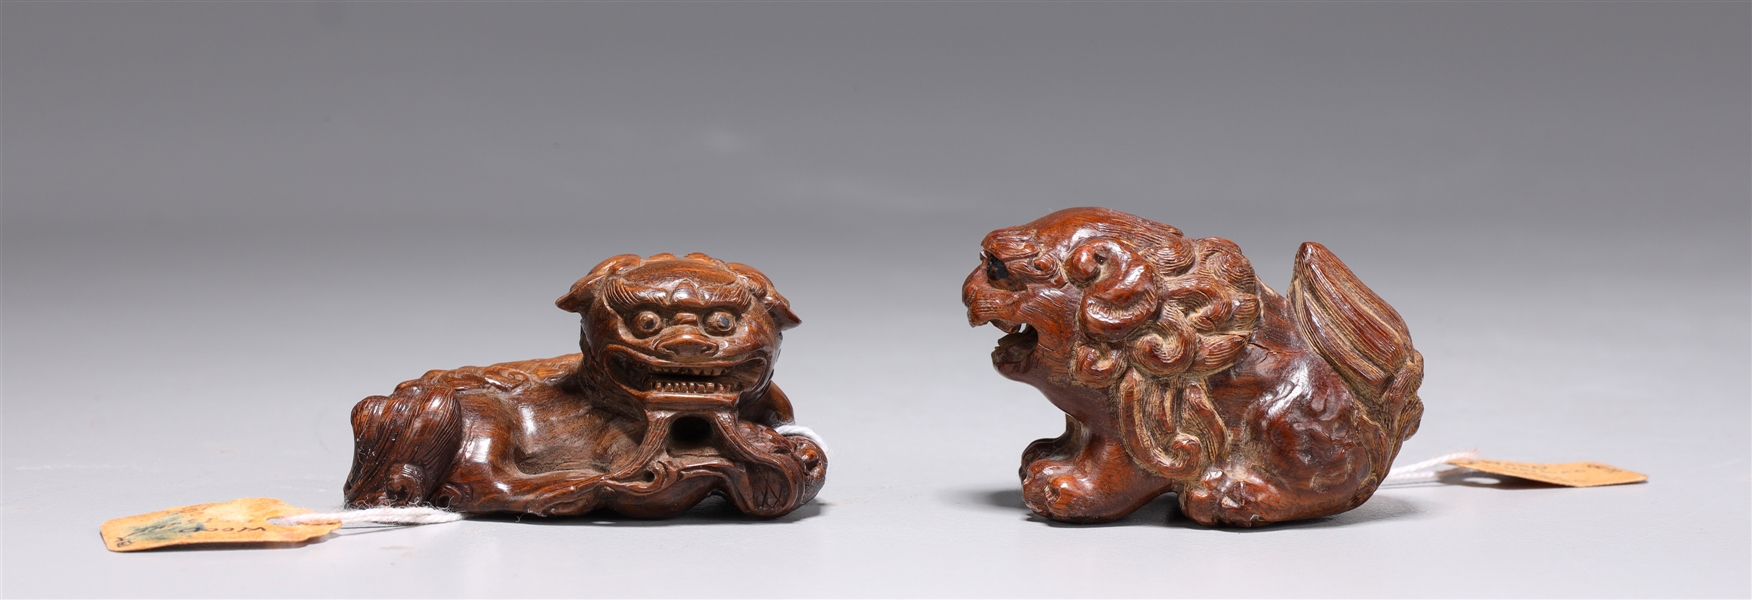 Two Antique Japanese Carved Wood Netsukes